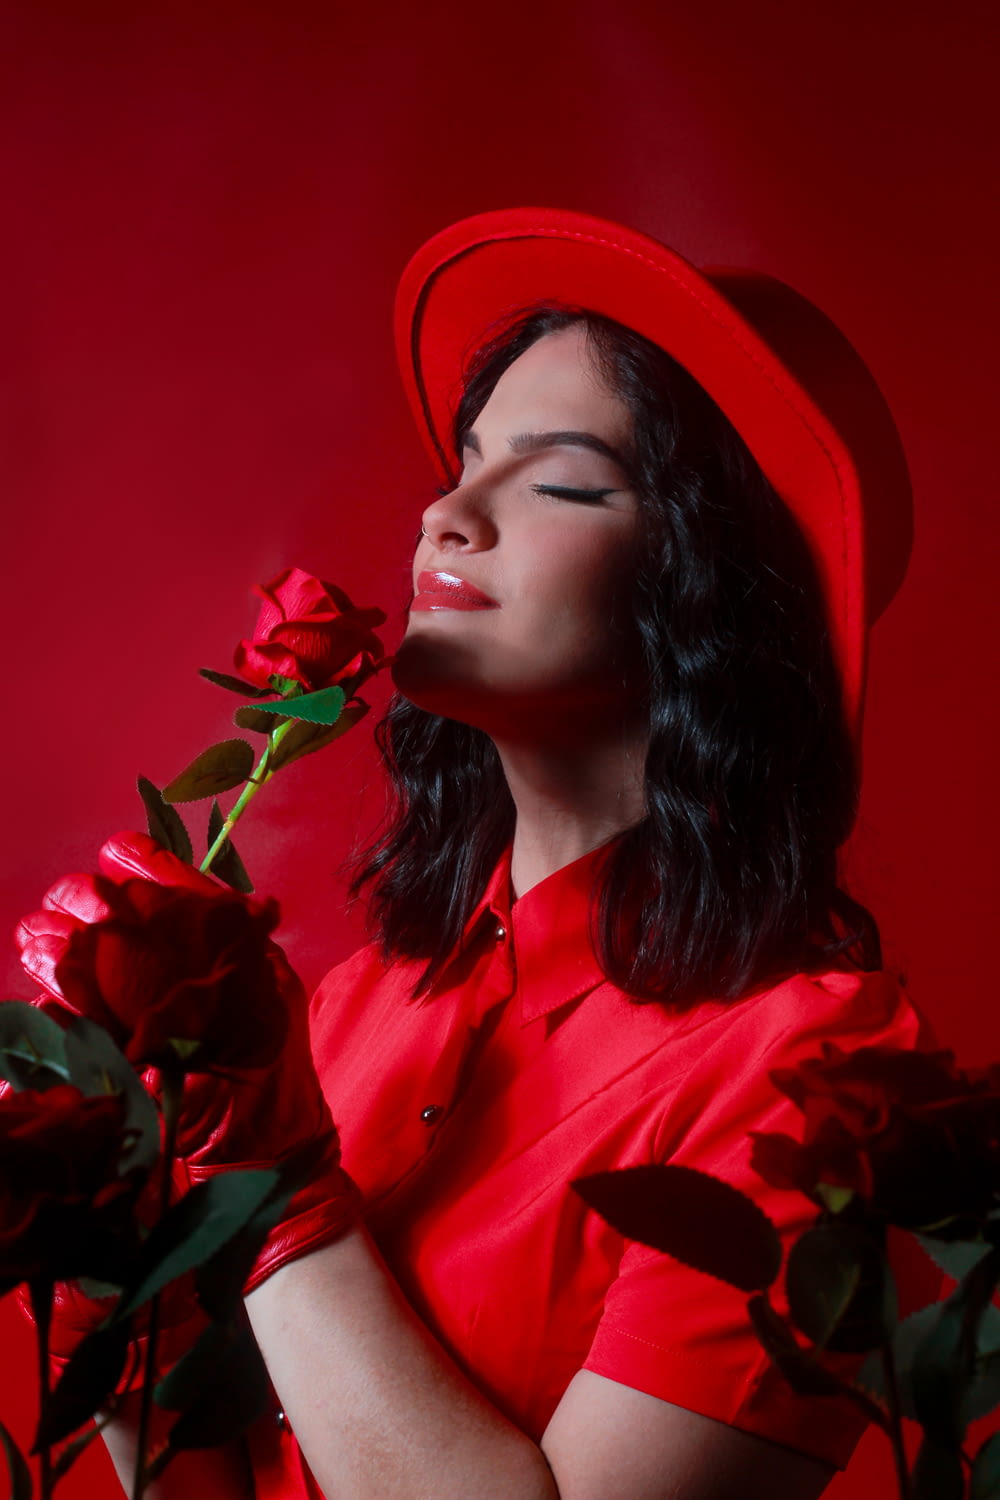 a woman wearing a red hat and holding a rose